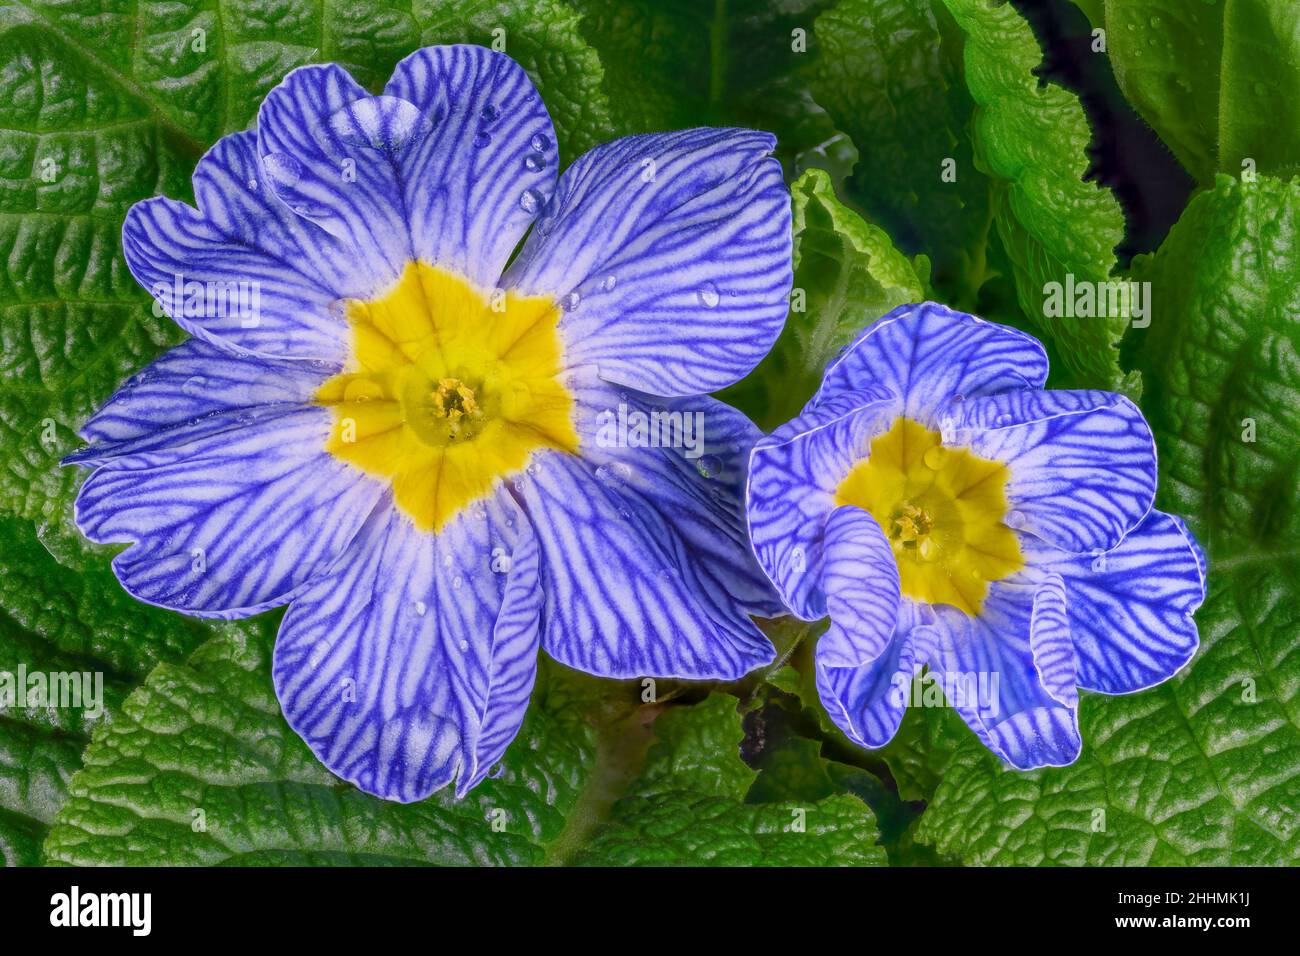 Gorgeous Blue Primula, (Primula vulgaris), also known as Primrose, flowers nestled amongst dark green leaves and sprinkled with dewdrops Stock Photo